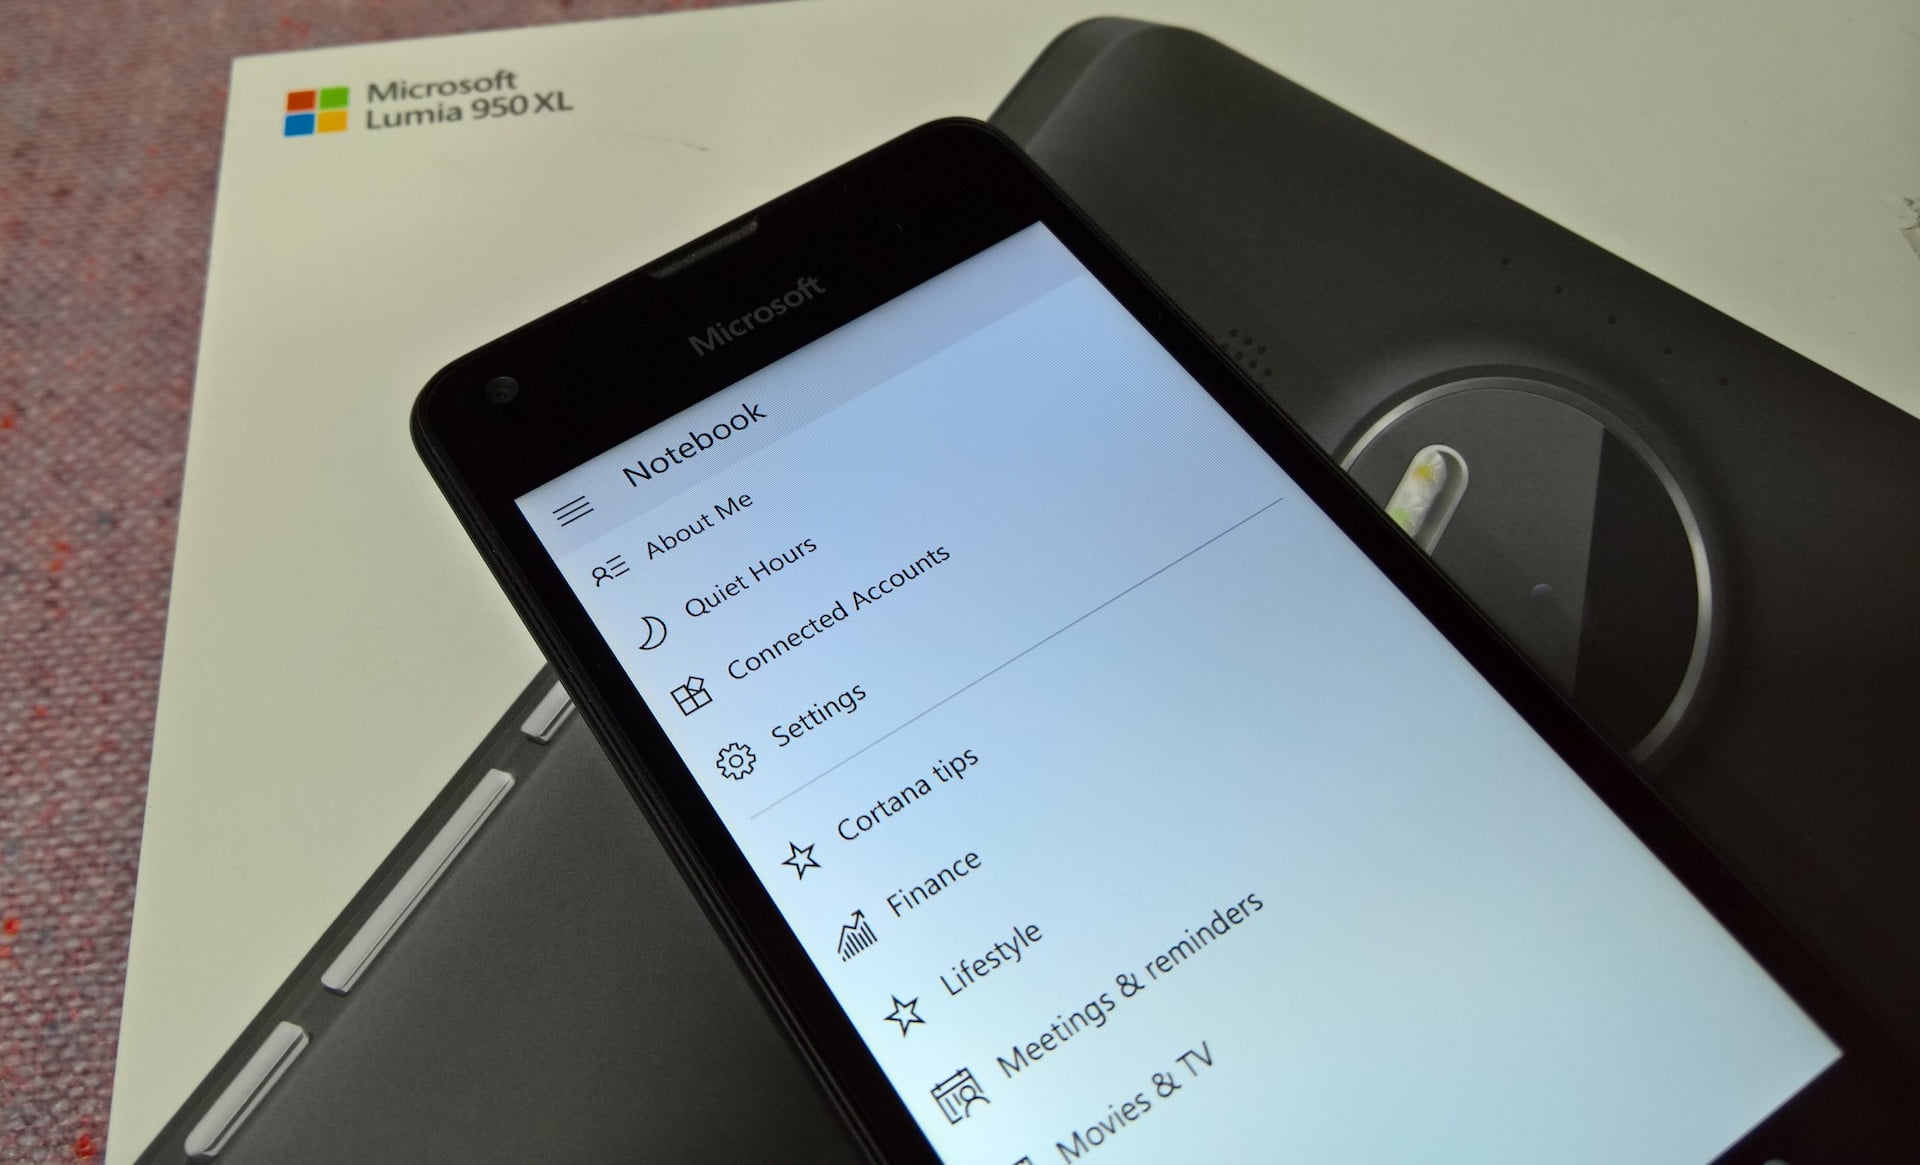 Use Quiet Hours in Windows 10 Mobile